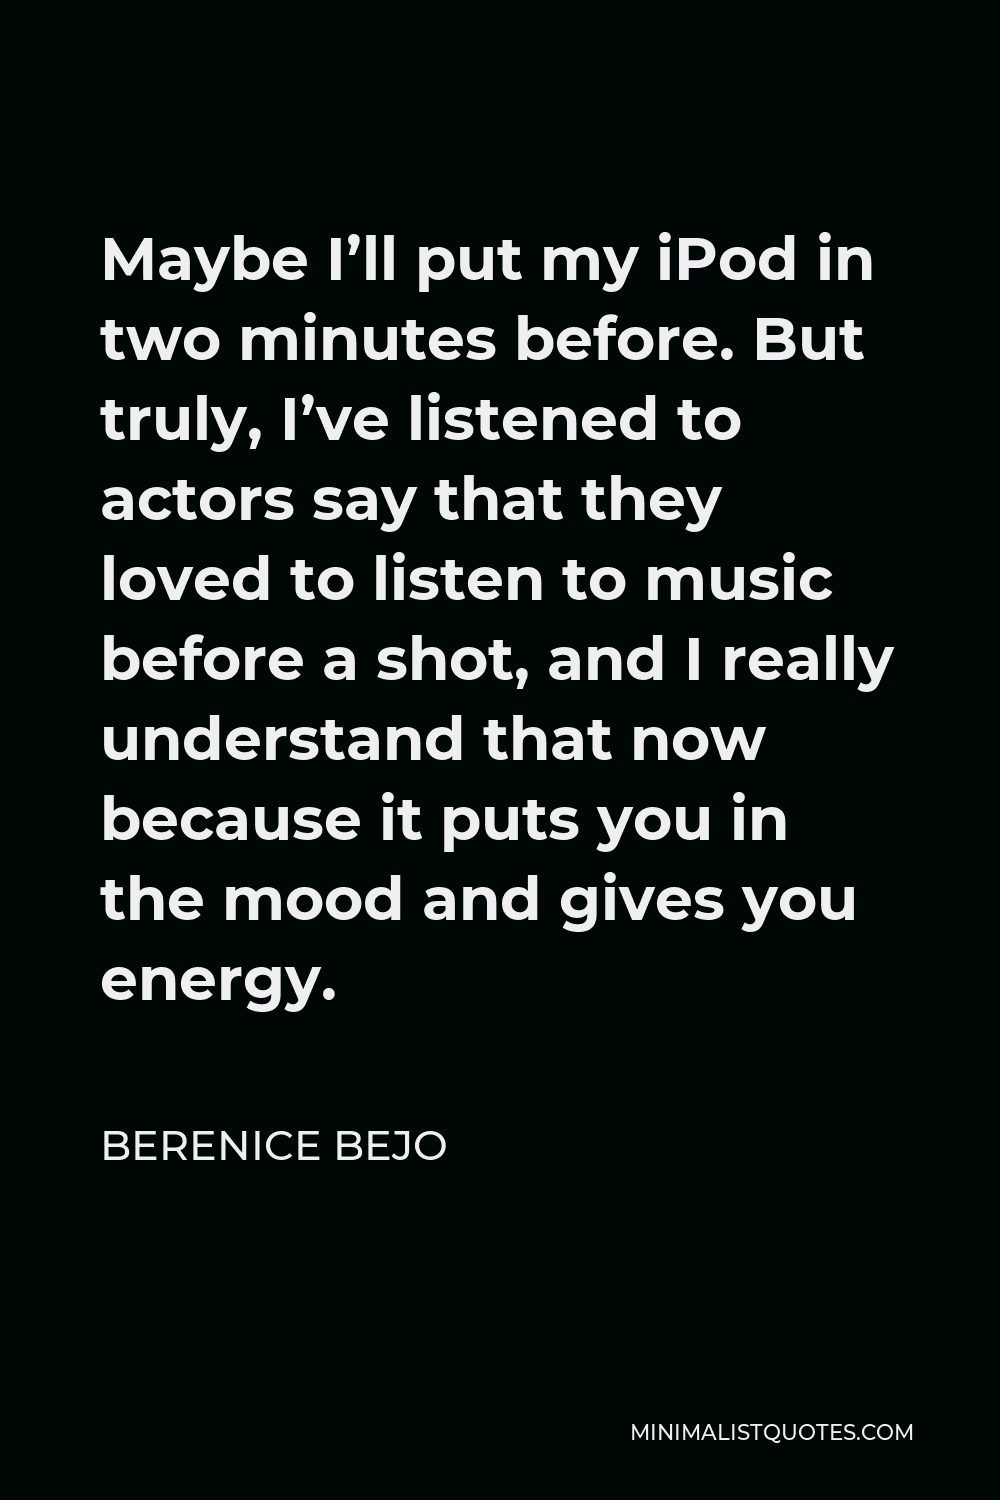 Berenice Bejo Quote - Maybe I’ll put my iPod in two minutes before. But truly, I’ve listened to actors say that they loved to listen to music before a shot, and I really understand that now because it puts you in the mood and gives you energy.